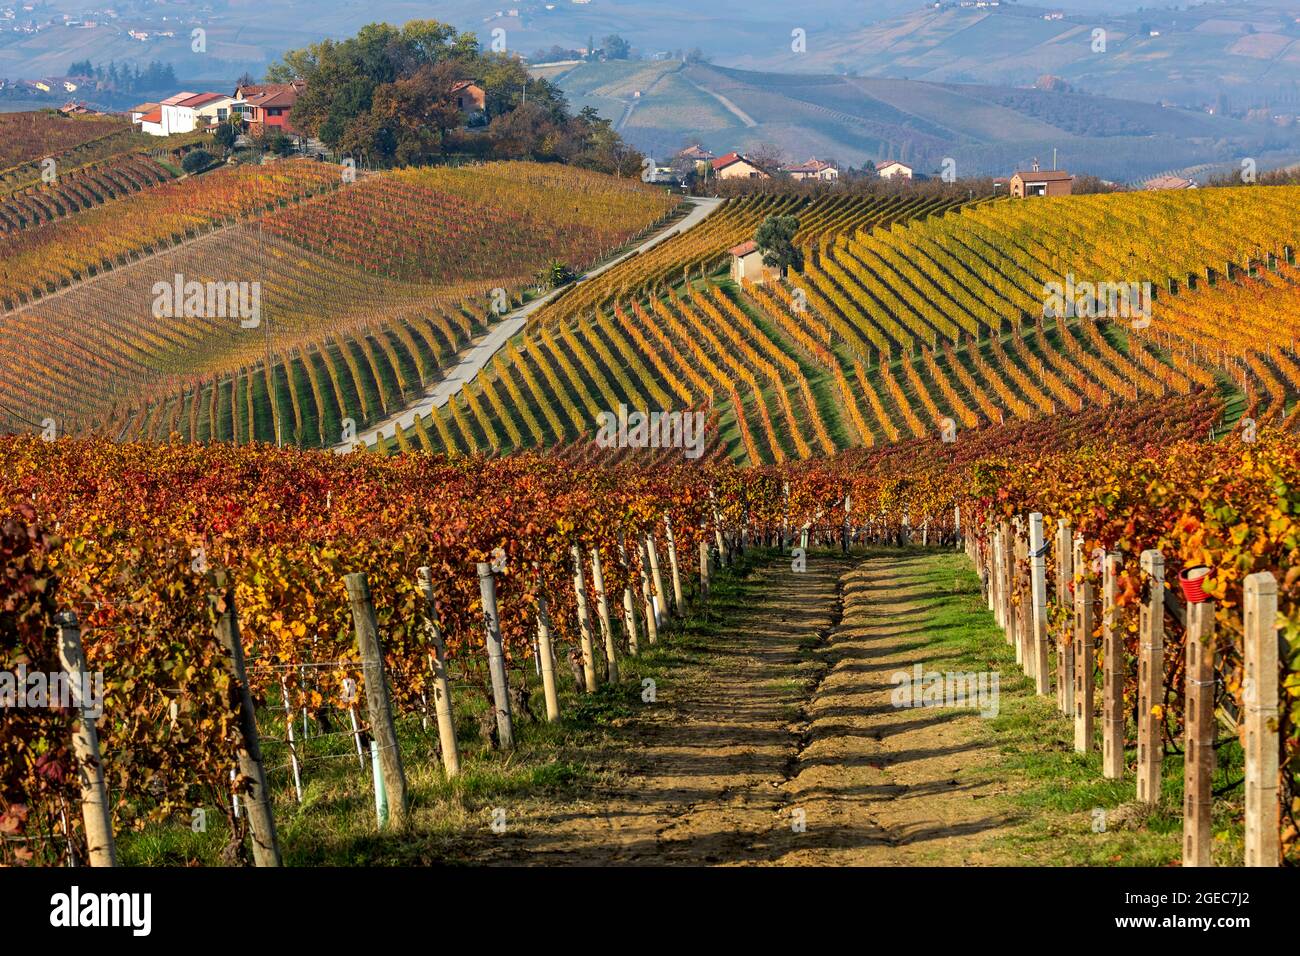 Rows of colorful autumnal vineyards on the gills of Langhe in Piedmont, Northern Italy. Stock Photo